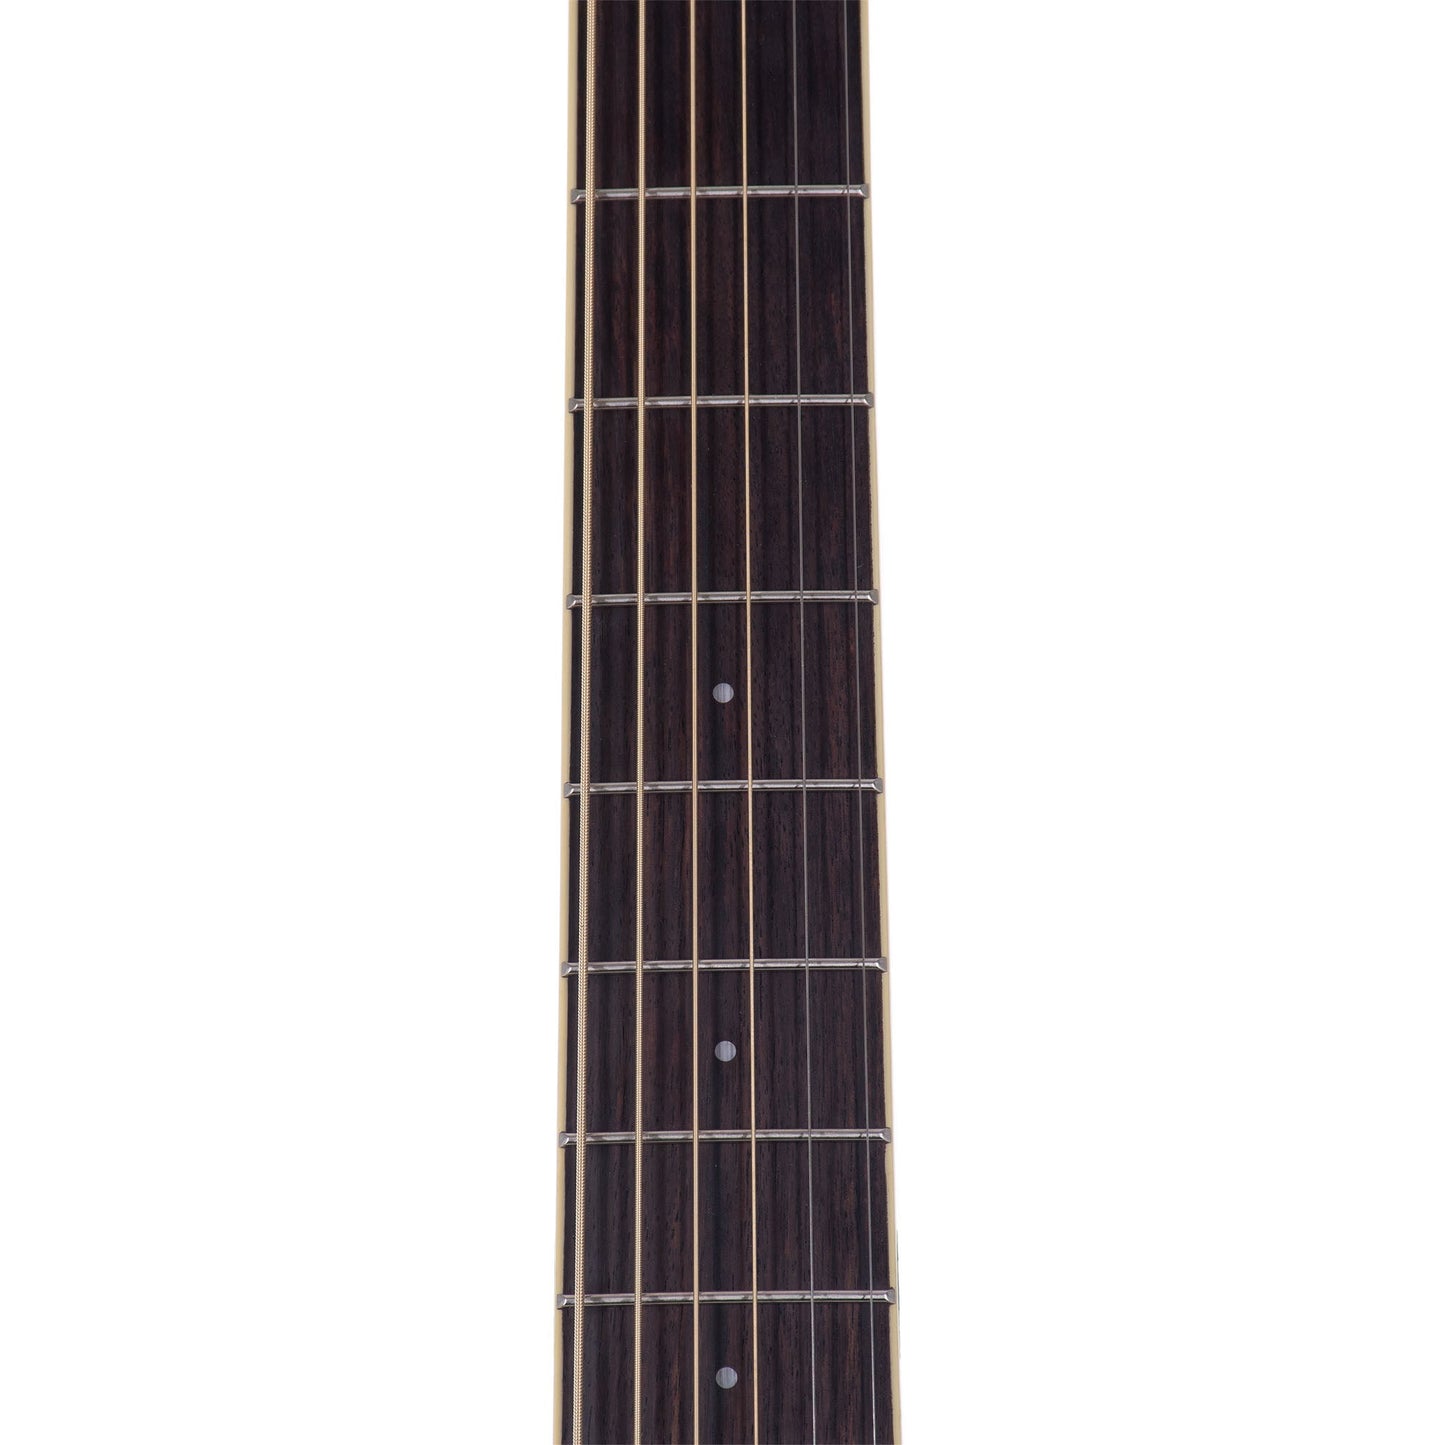 Yamaha FS Transascoustic Concert Acoustic-Electric Guitar, Sitka Spruce Top, Mahogany Back And Sides, Brown Sunburst